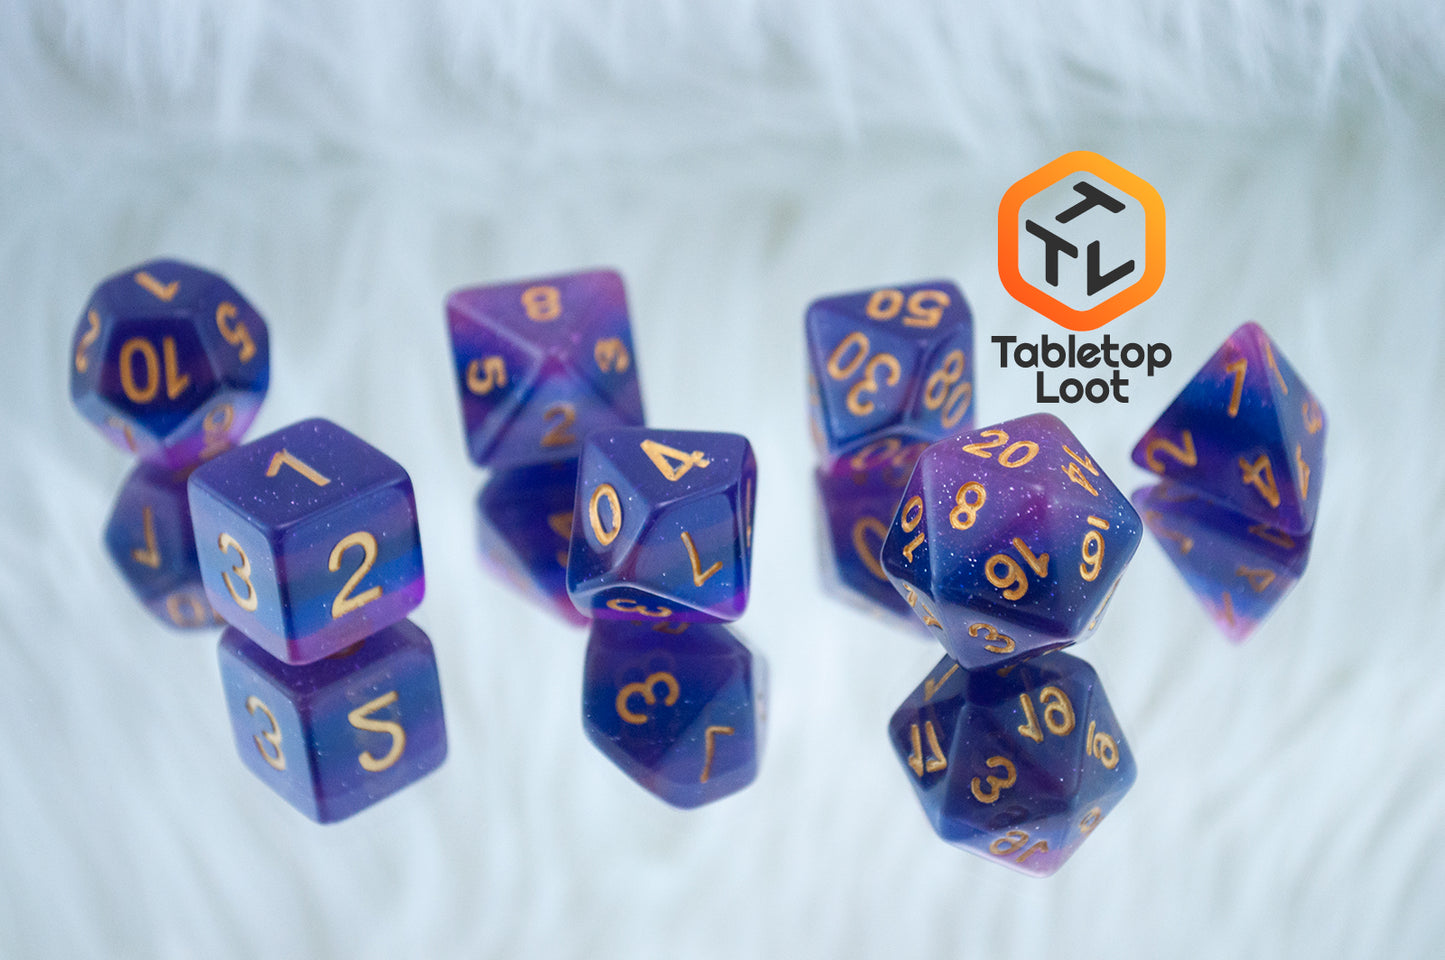 The Lavender Galaxy 7 piece dice set from Tabletop Loot with layers of pink, purple, and blue, lots of glitter, and gold numbering.